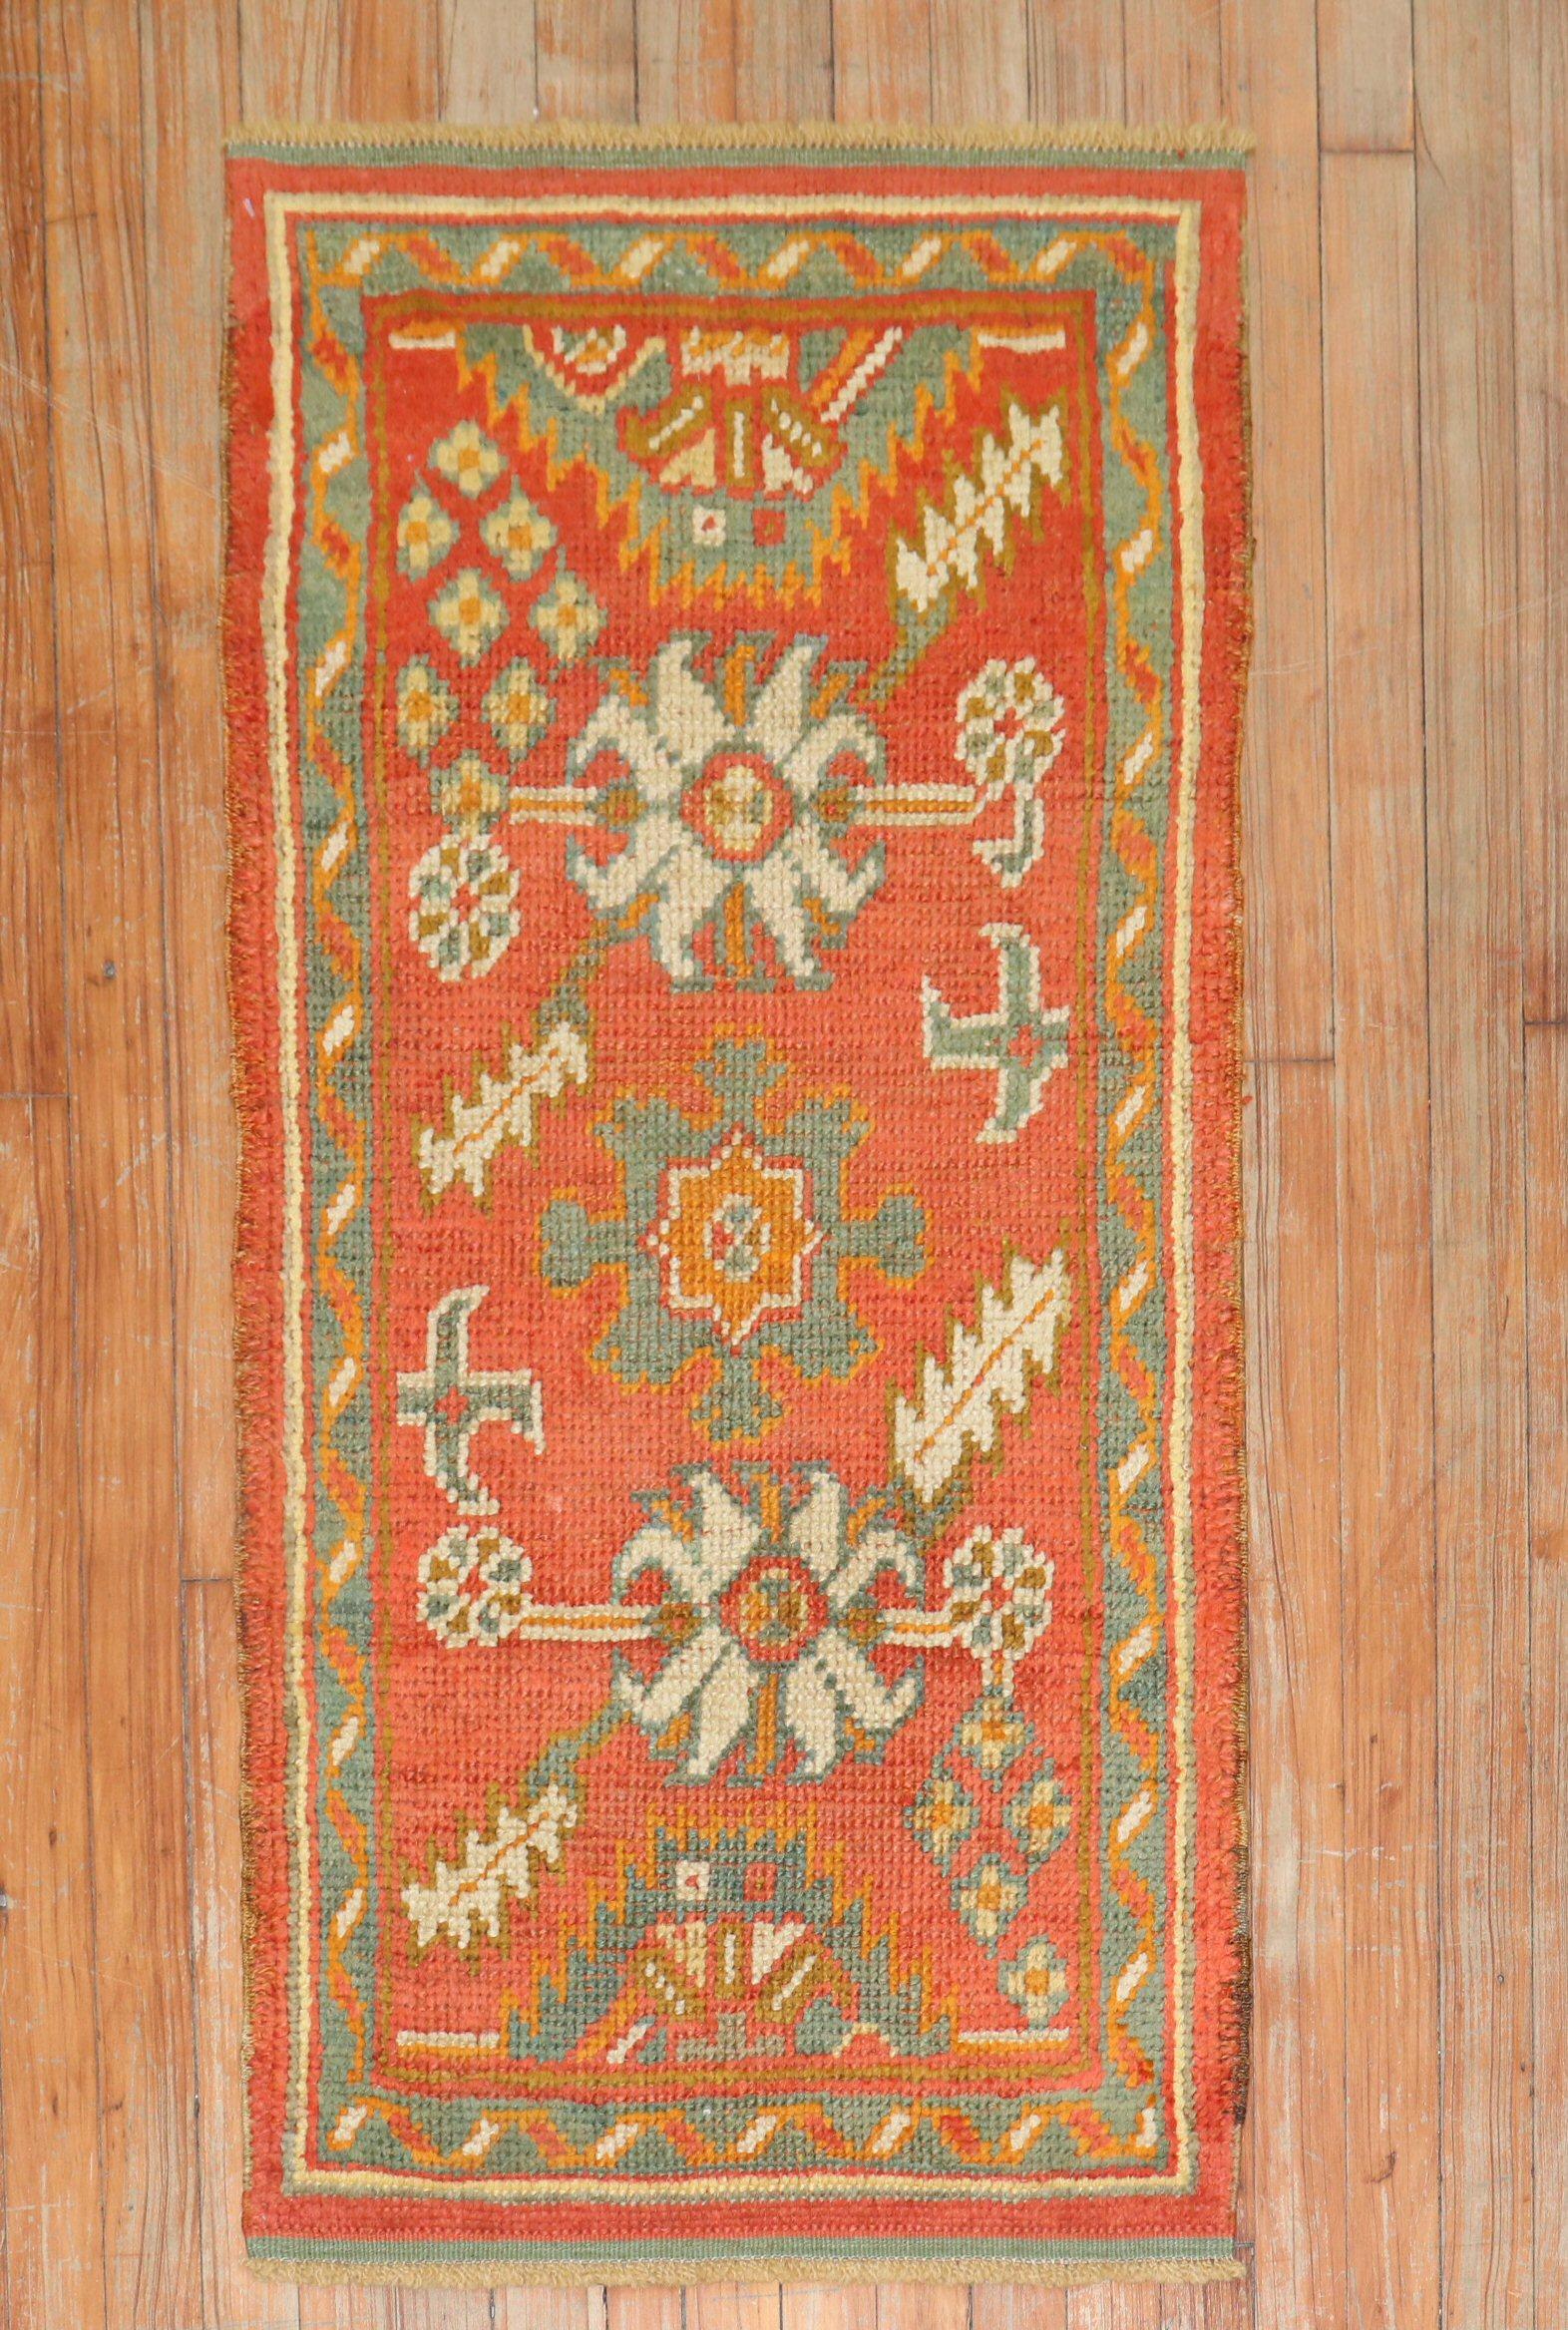 An early 20th-century orange color antique turkish oushak scatter throw size rug

Measures: 2' x 4'1”.